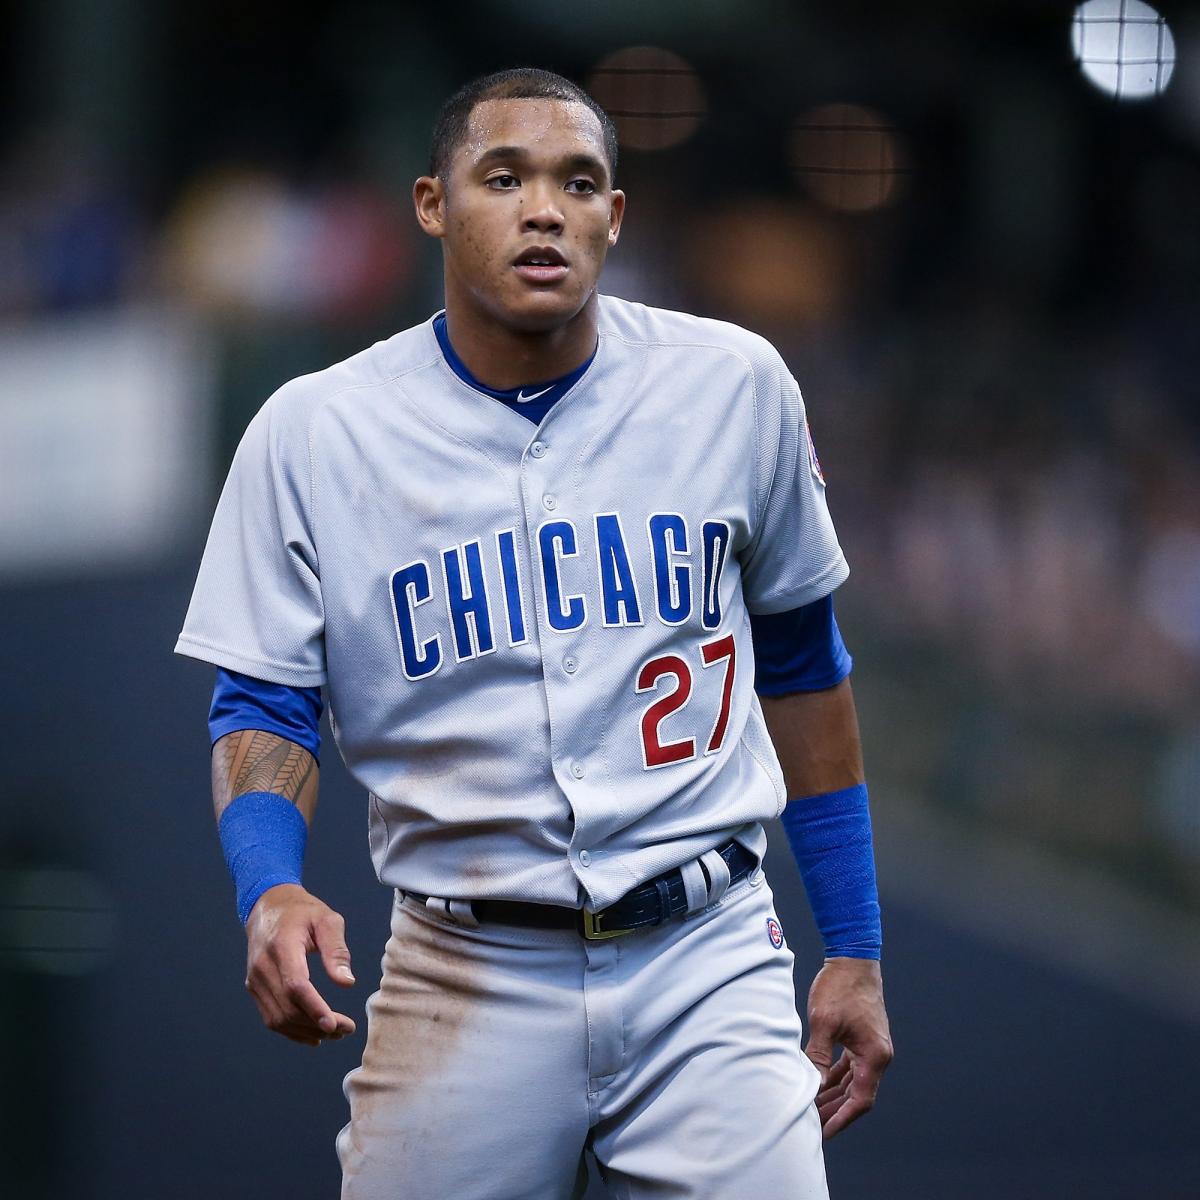 The Cubs did try to trade Addison Russell early in the offseason